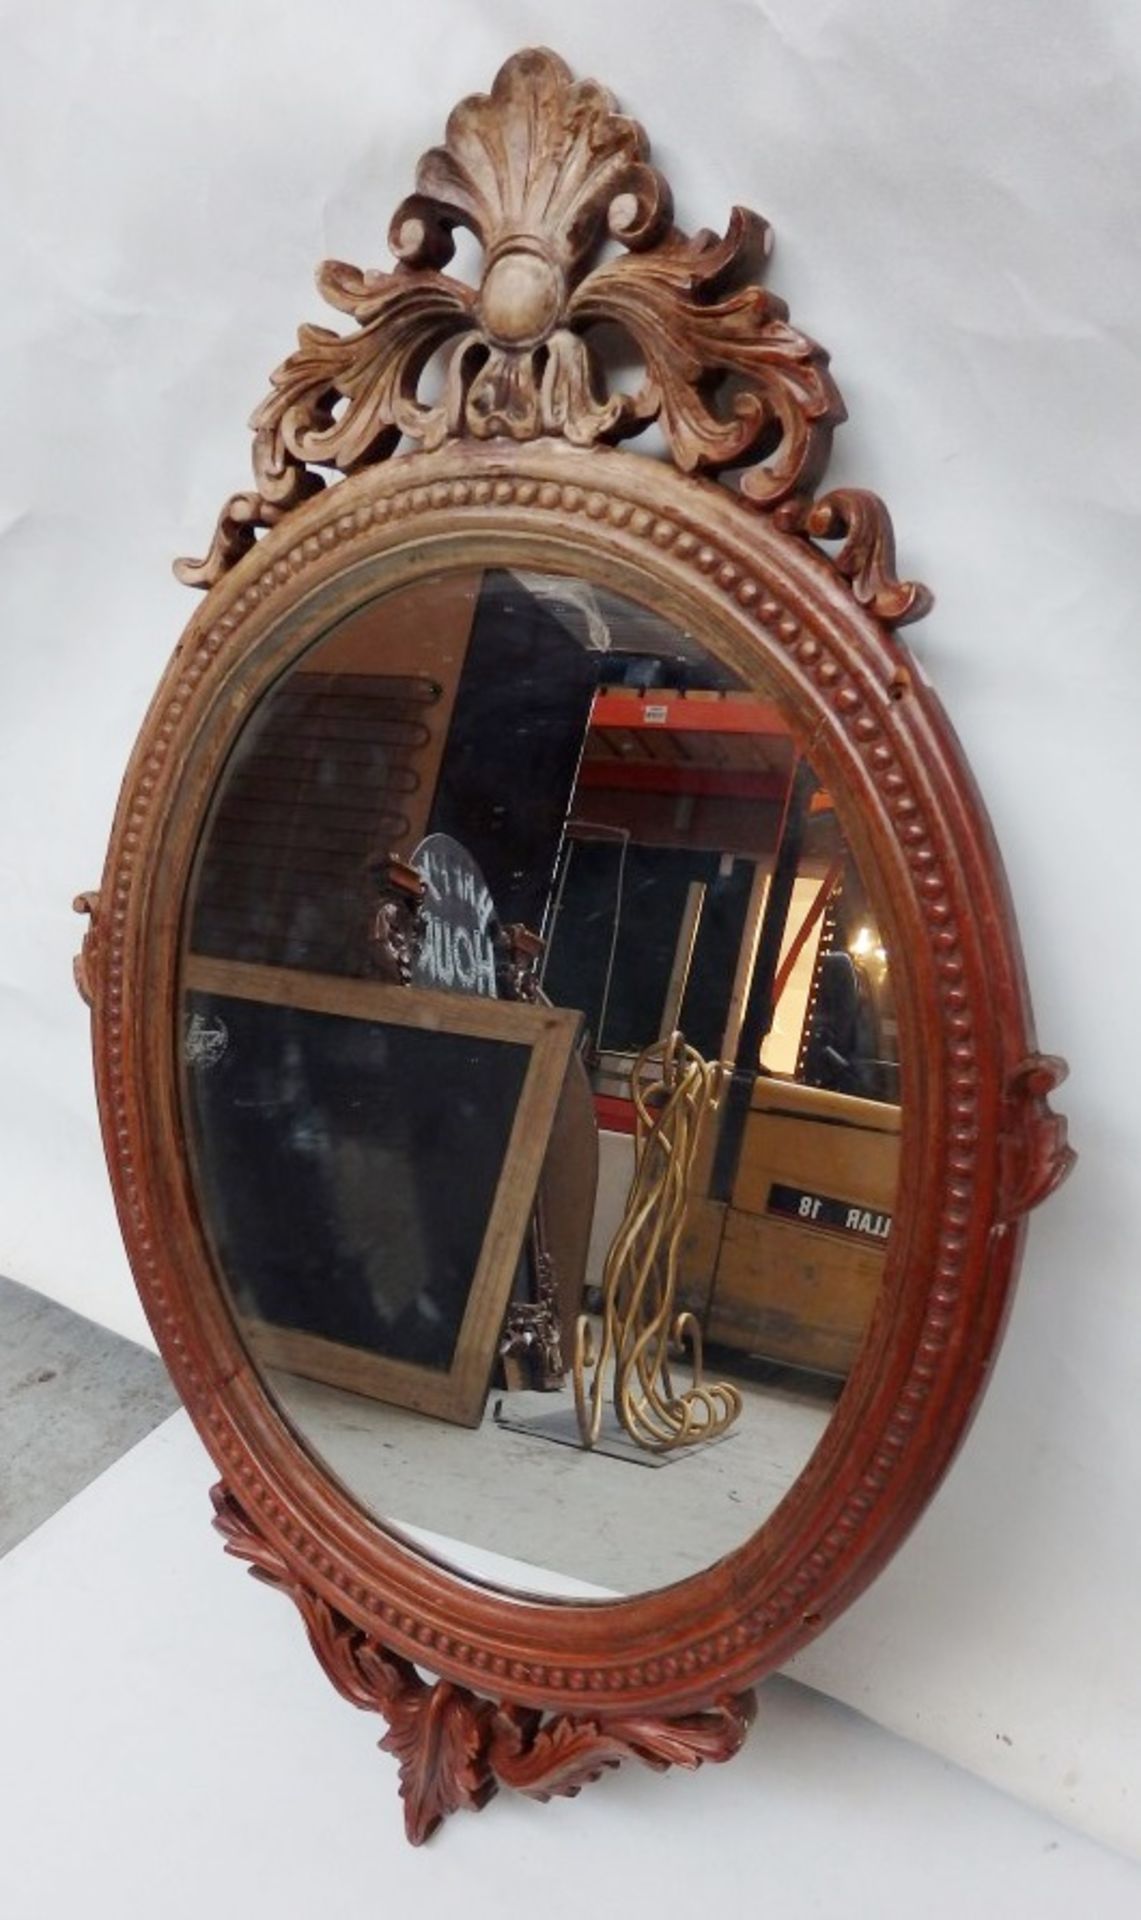 1 x Ornate Vintage Wooden Framed Oval Mirror - 98 x 60cm - Recently Removed From An Upmarket Bar